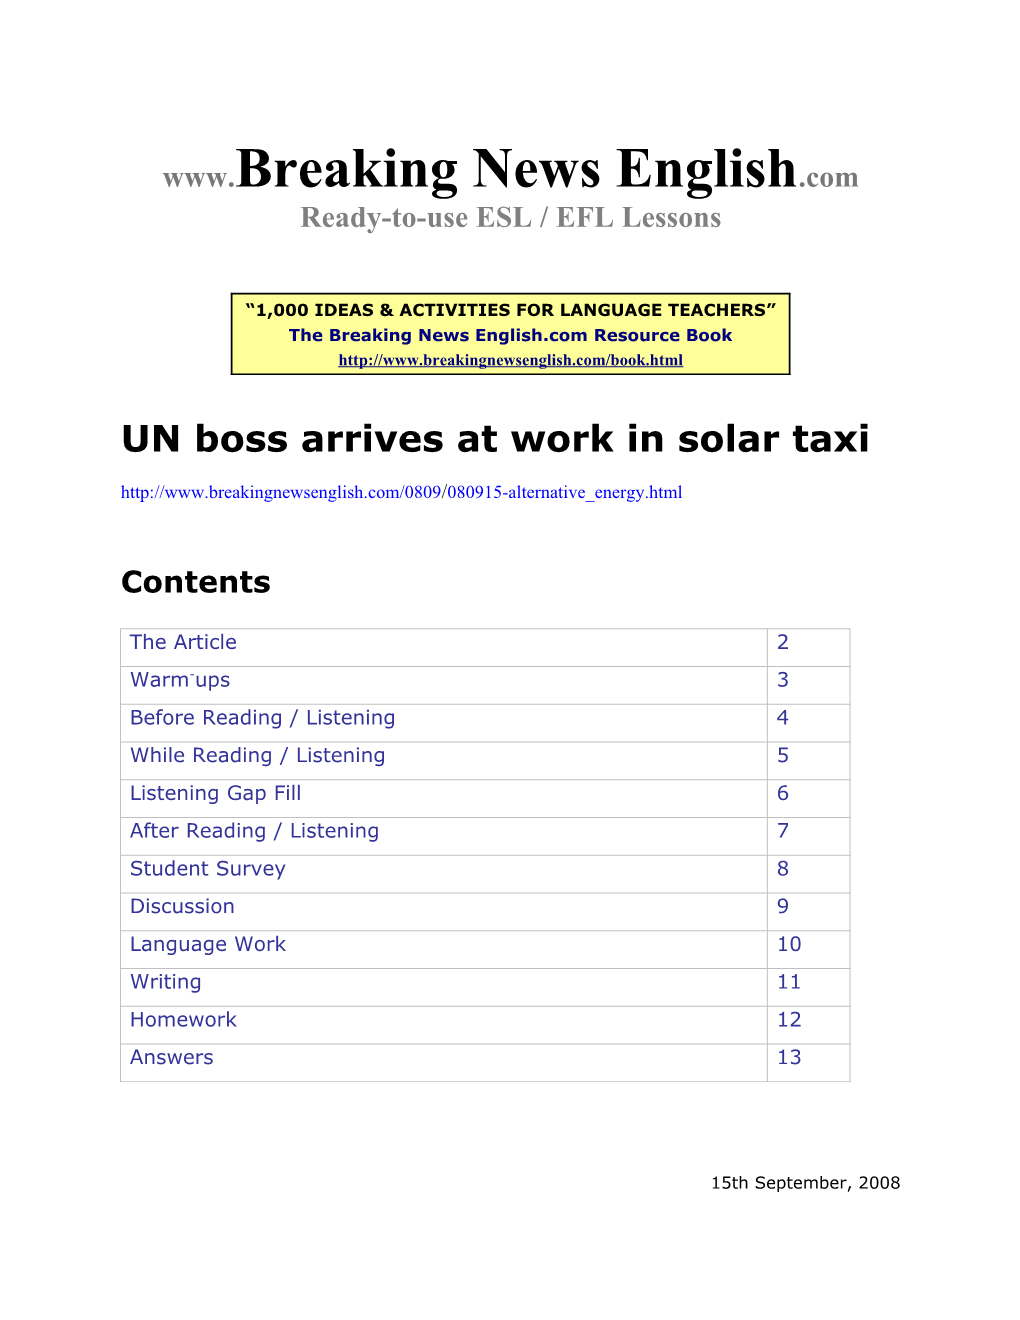 ESL Lesson: UN Boss Arrives at Work in Solar Taxi